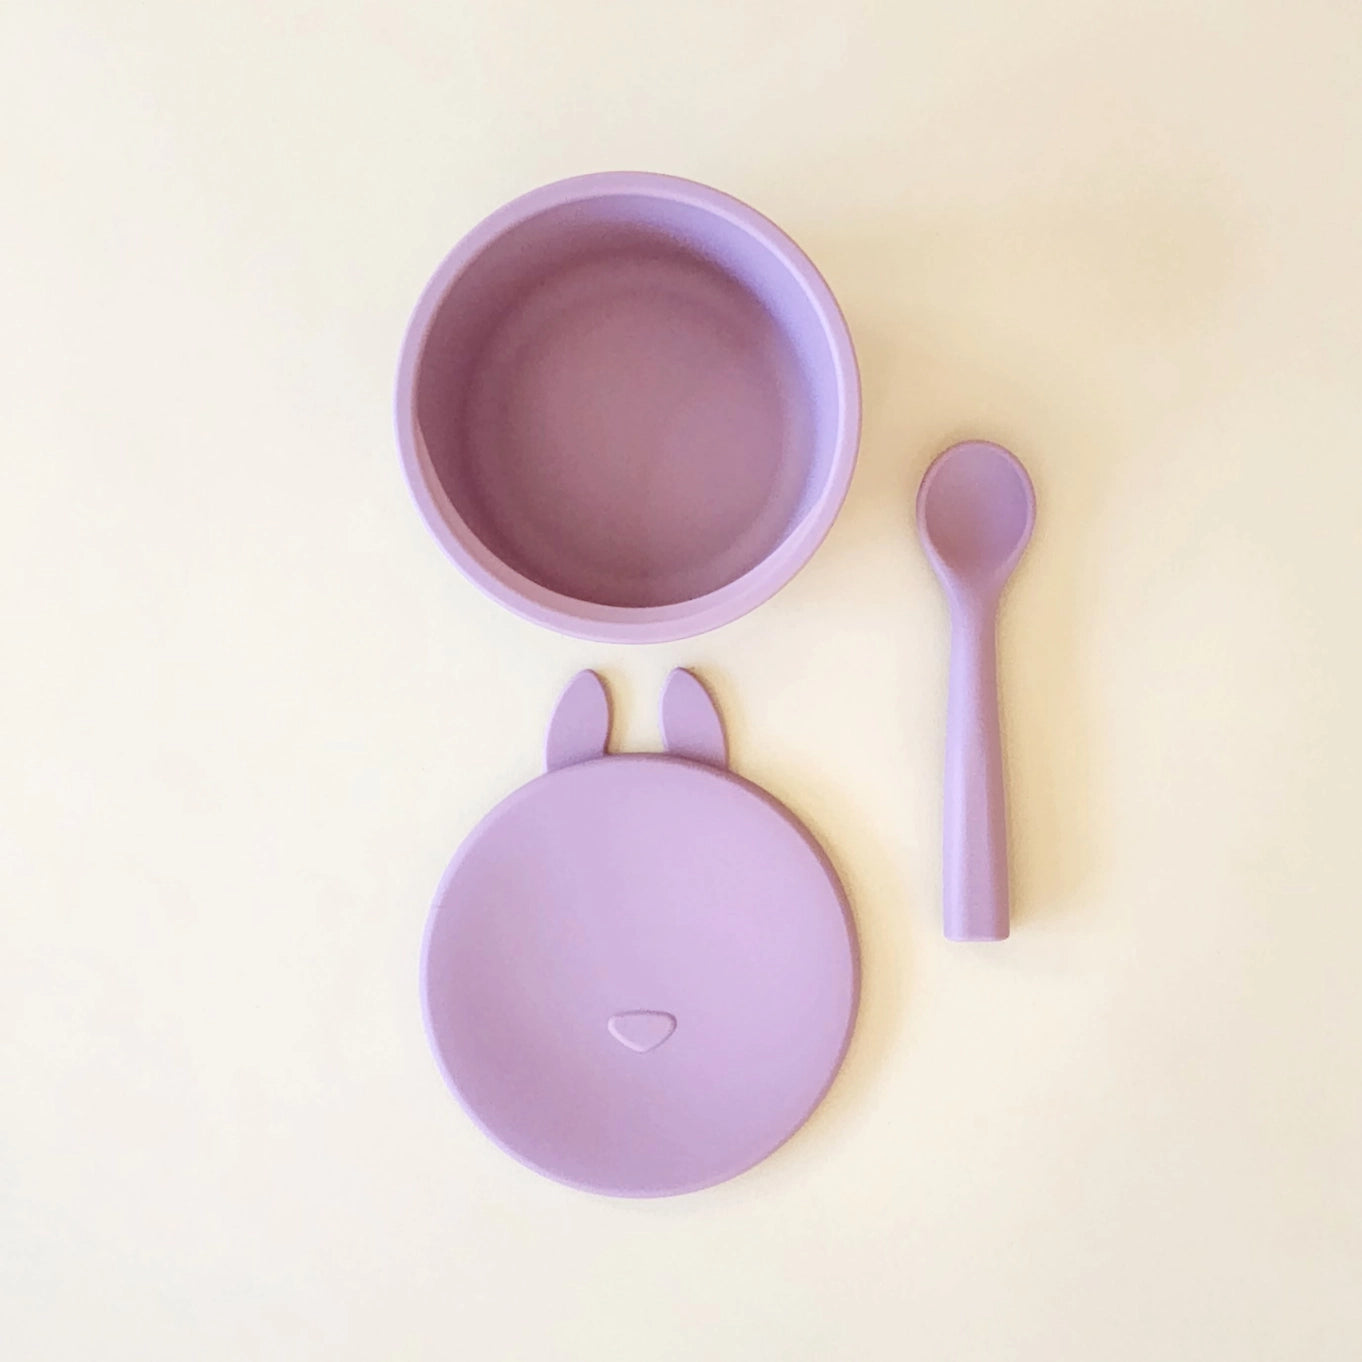 Bunny Suction Bowl + Spoon - Lulie